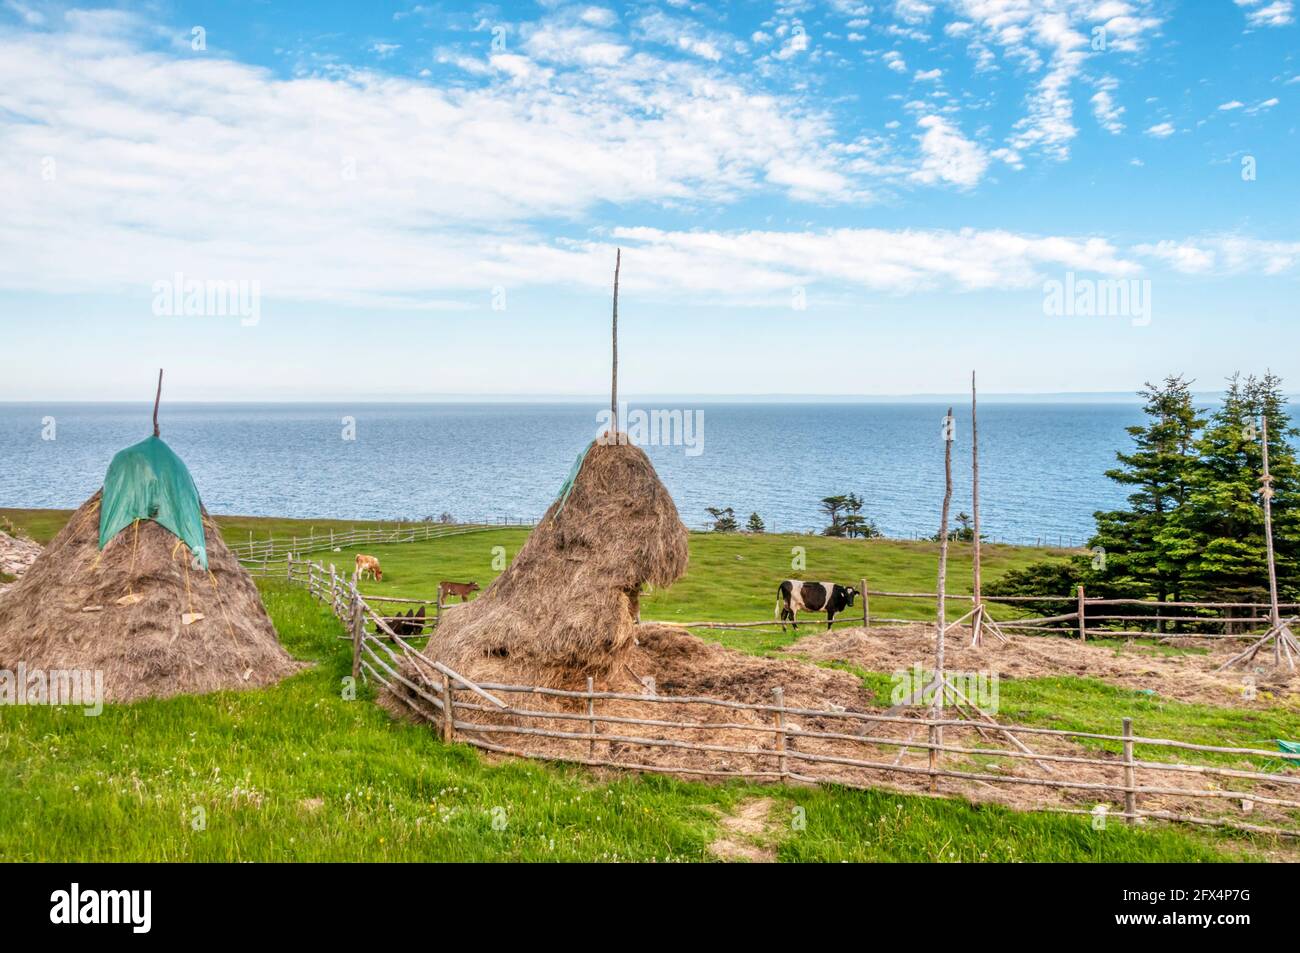 Traditional style of haystack at a smallholding on the coast of the Port au Port Peninsula, Newfoundland. Stock Photo